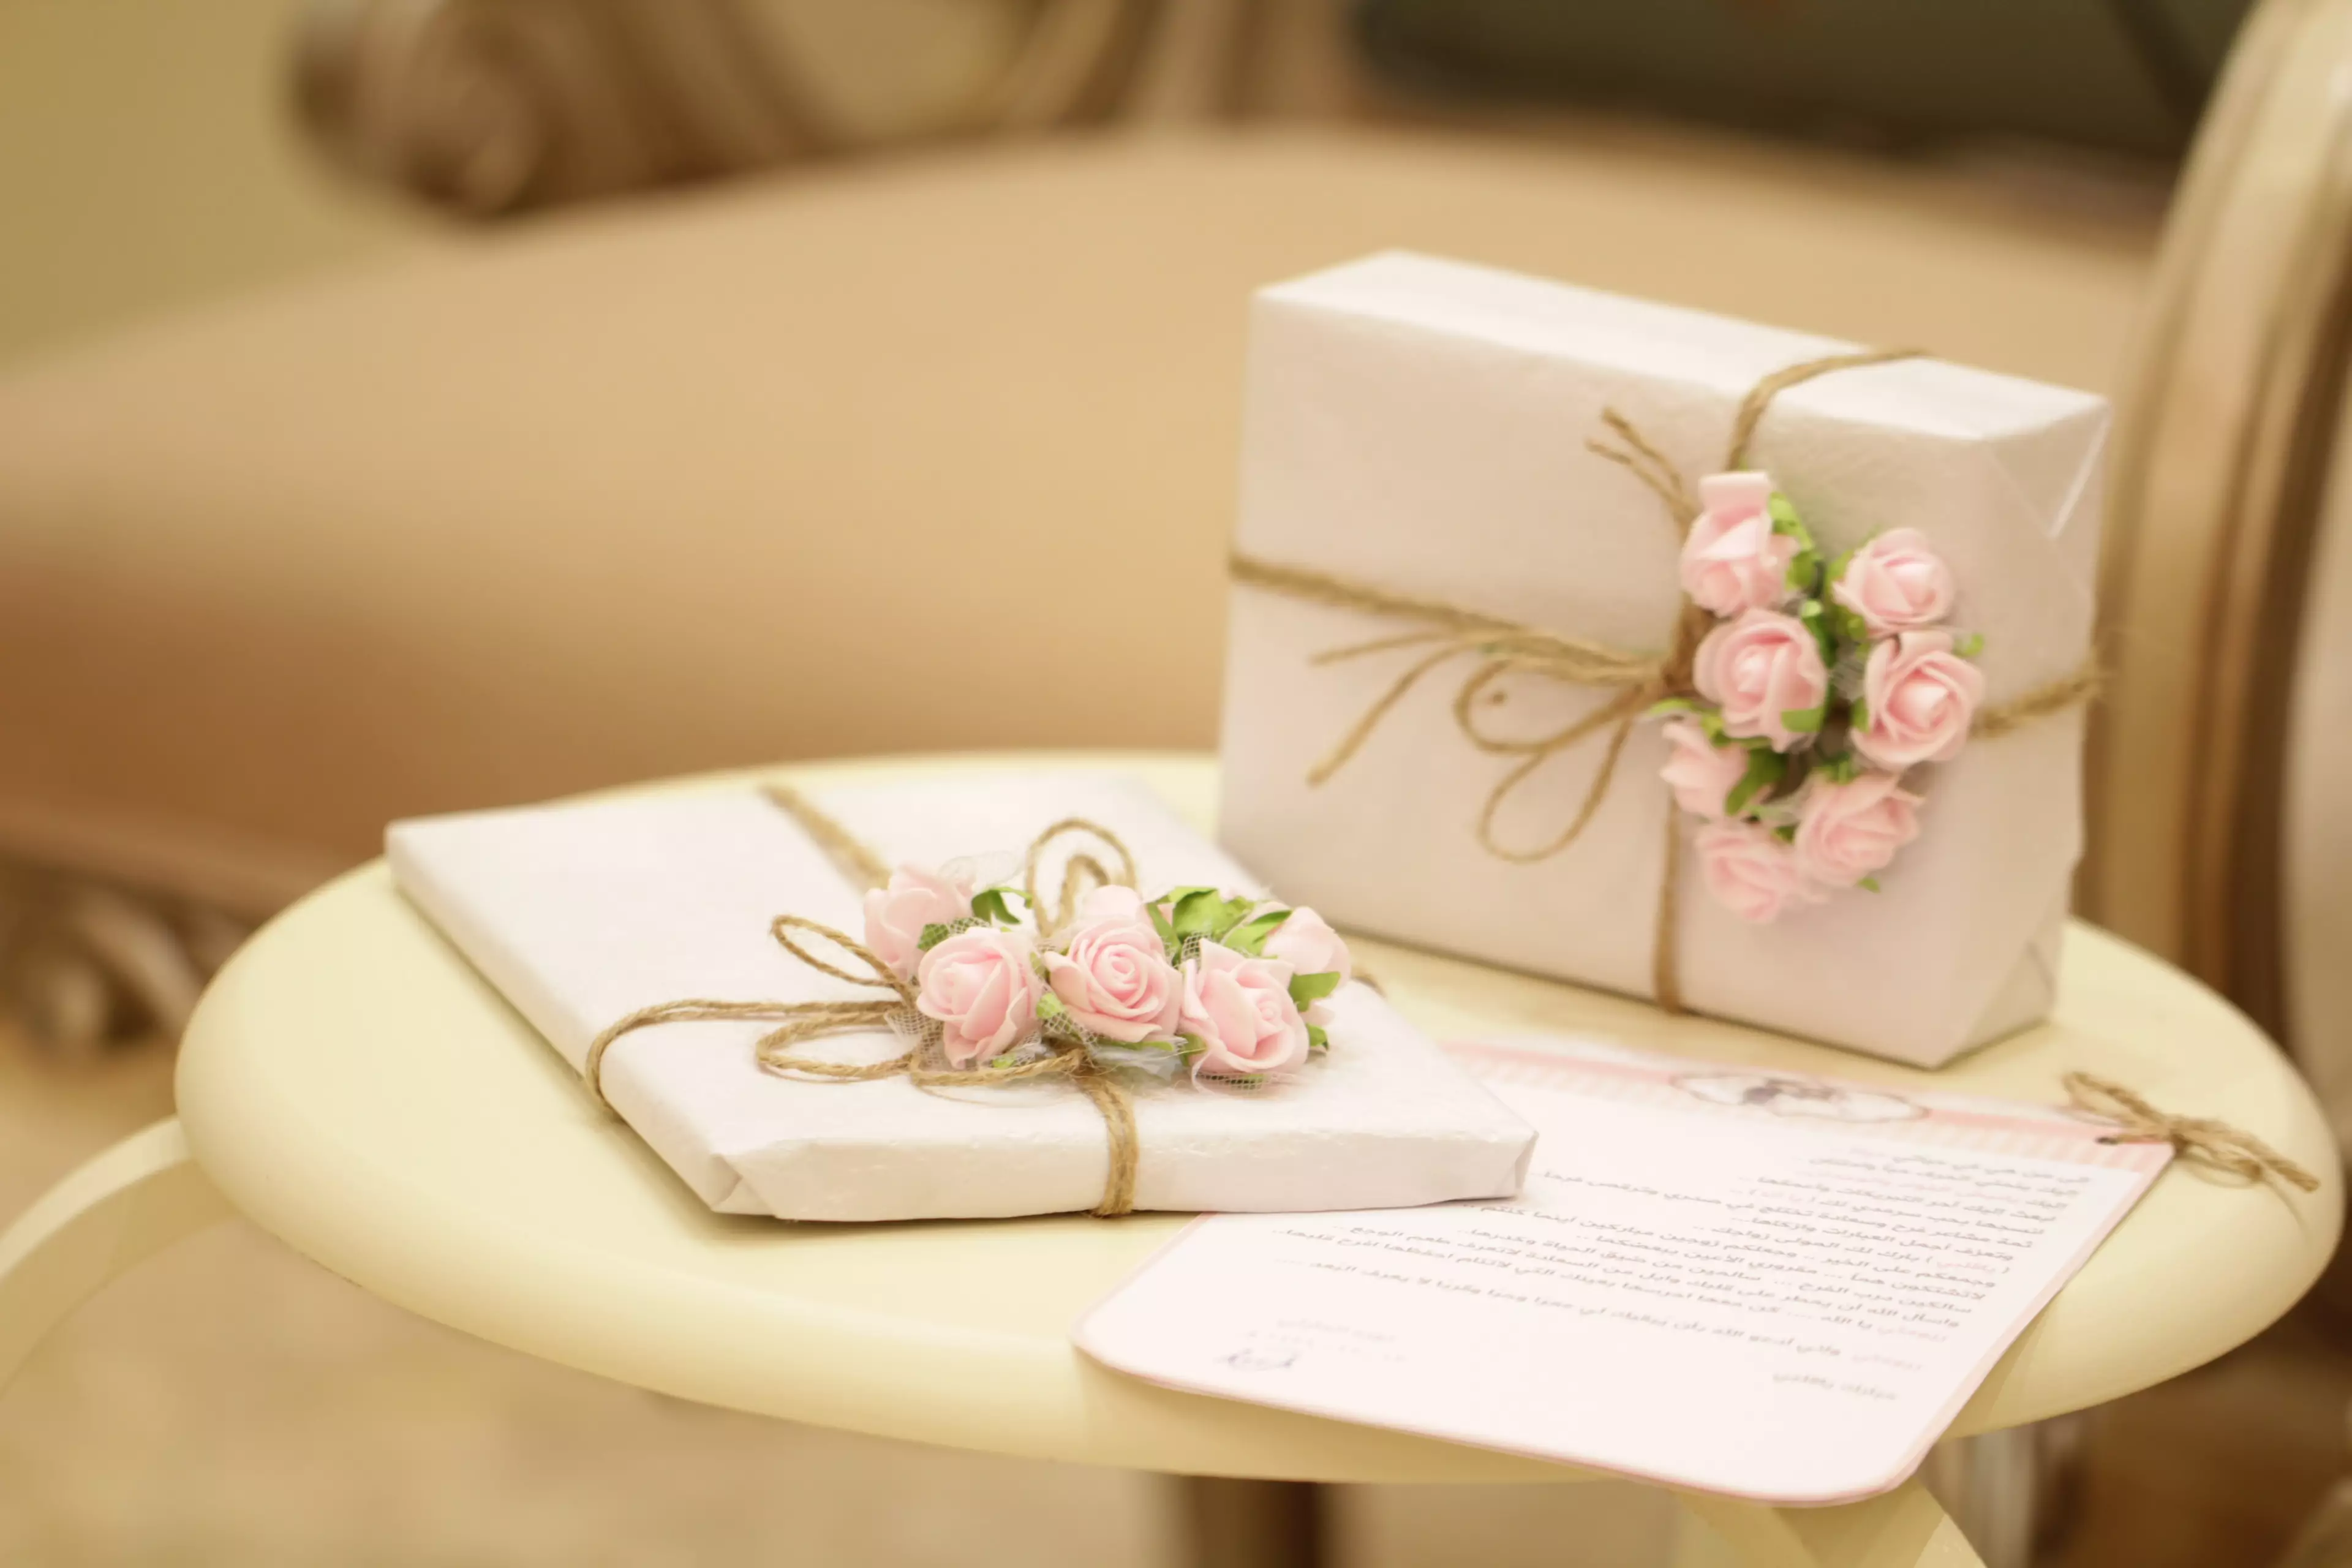 The bride had totted up a number of guests who had not bought the newlyweds a present (